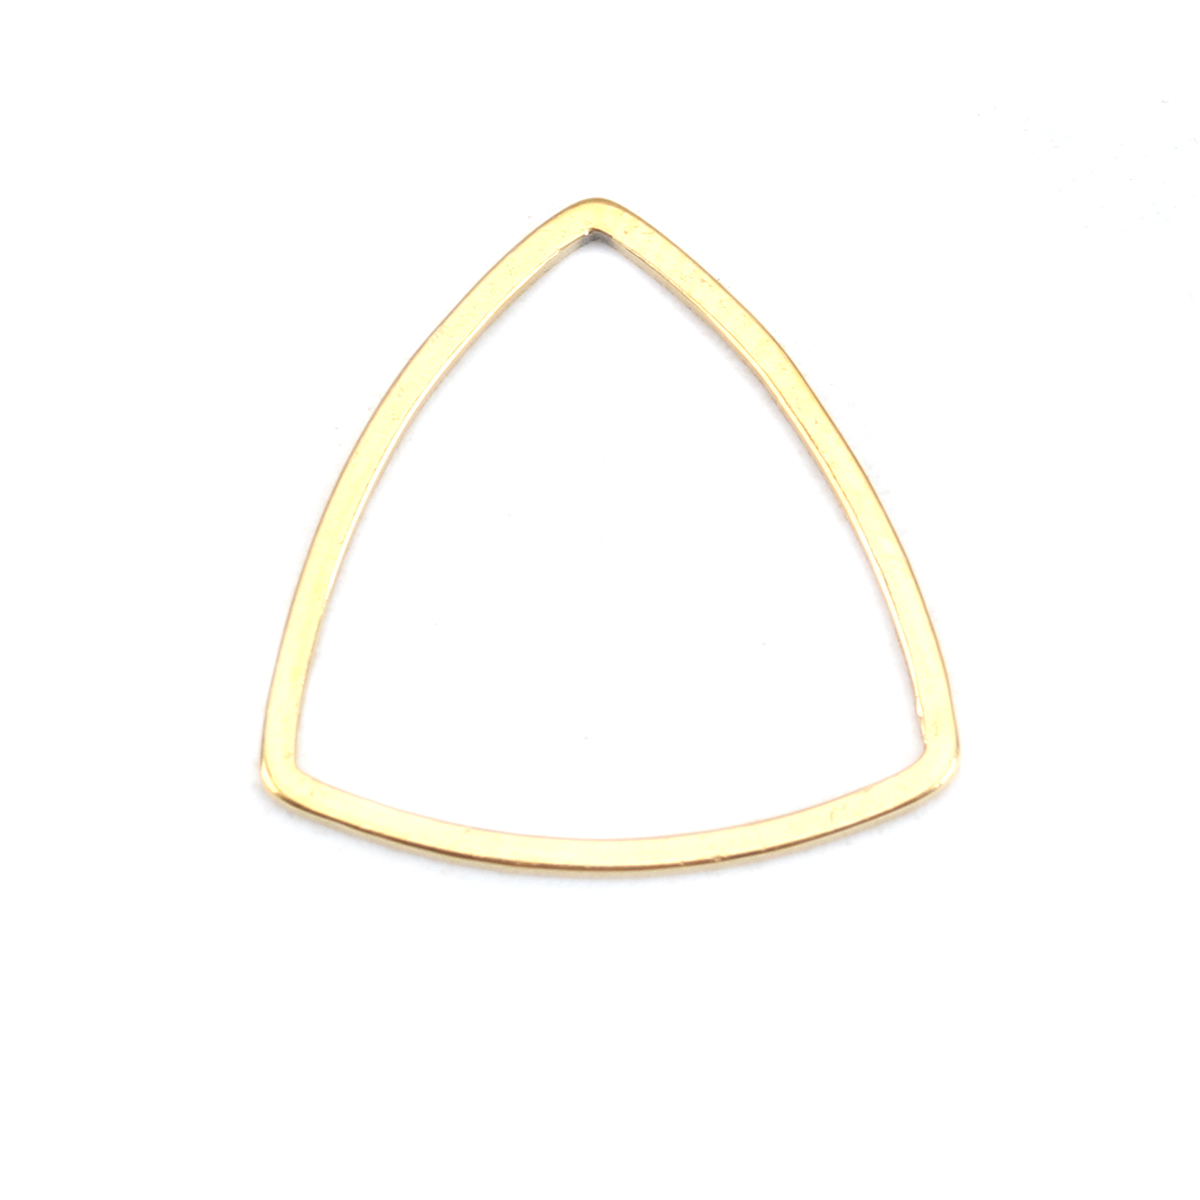 Picture of 304 Stainless Steel Frame Connectors Triangle Gold Plated Hollow 16mm x 16mm, 10 PCs